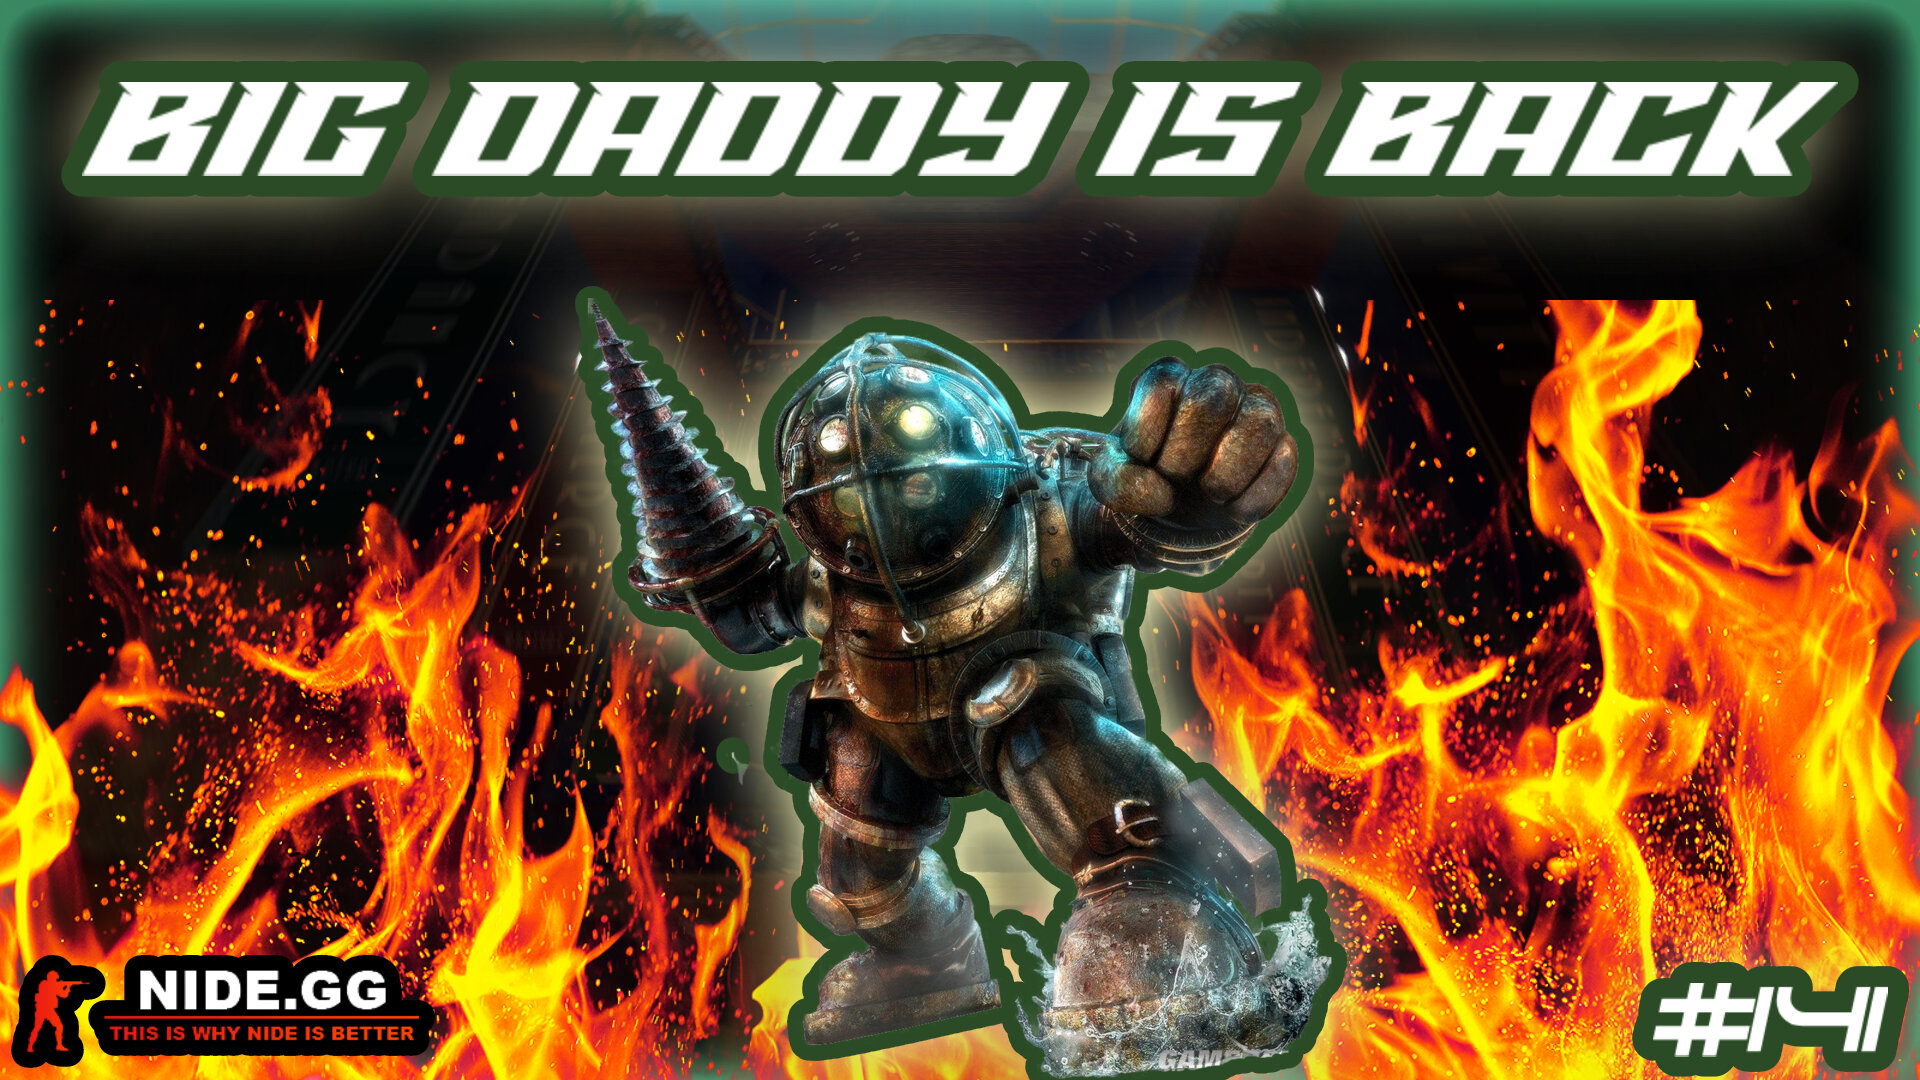 More information about "CSS Zombie Escape Mini-Event #141 - BIG DADDY IS BACK"